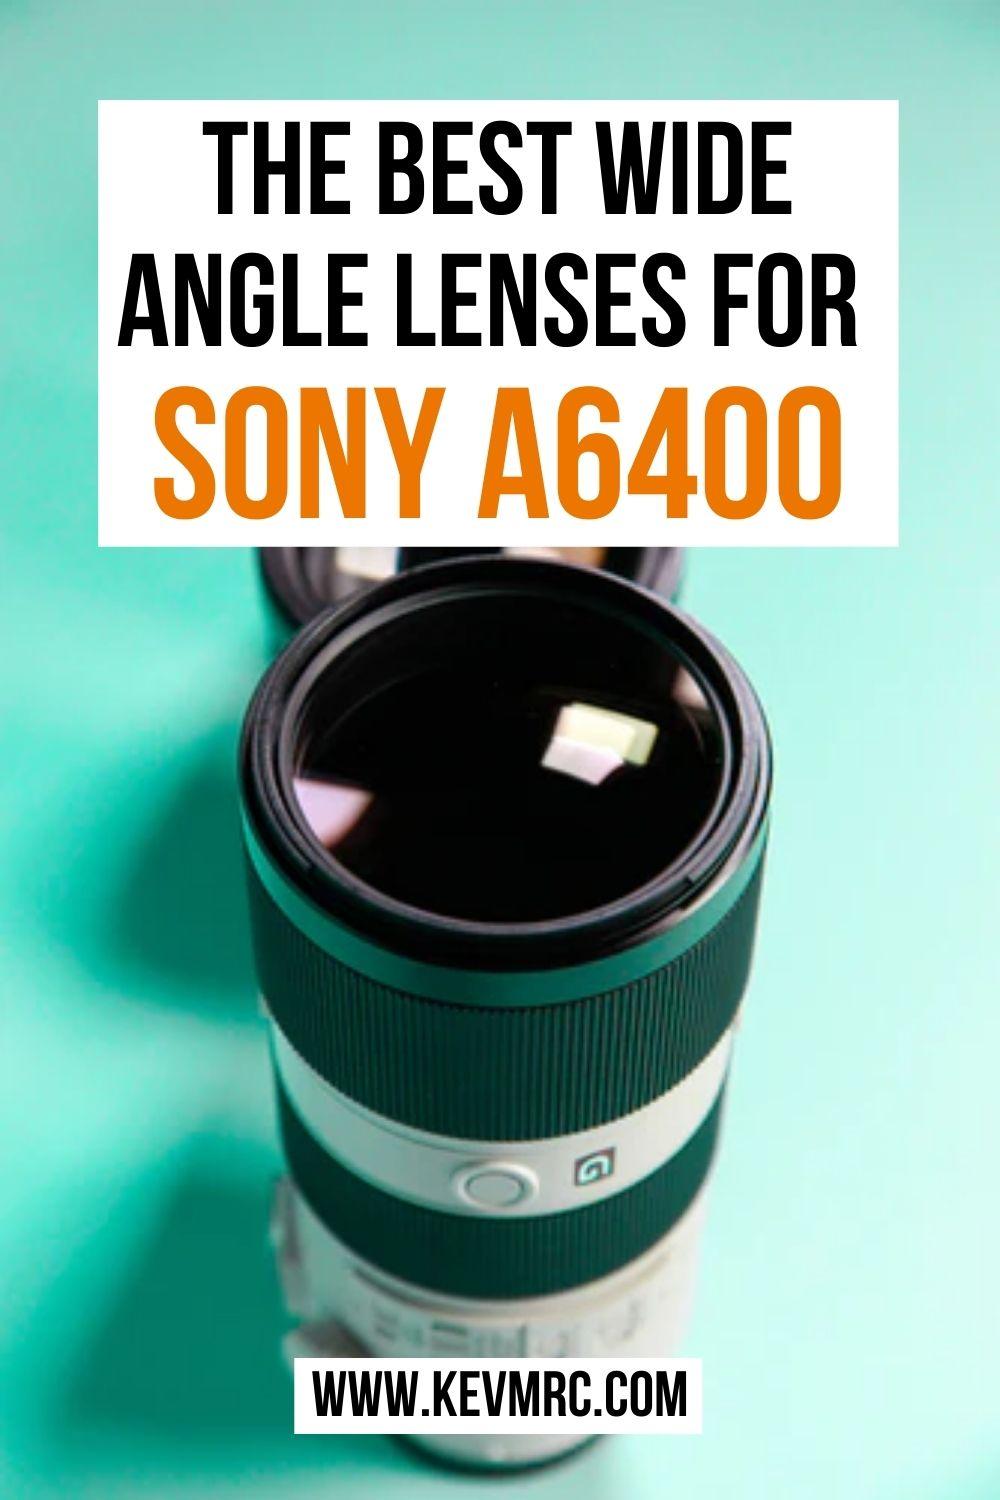 Find the best wide angle lens for Sony A6400. camera lens guide | photo guide | best sony lenses | photography gear 